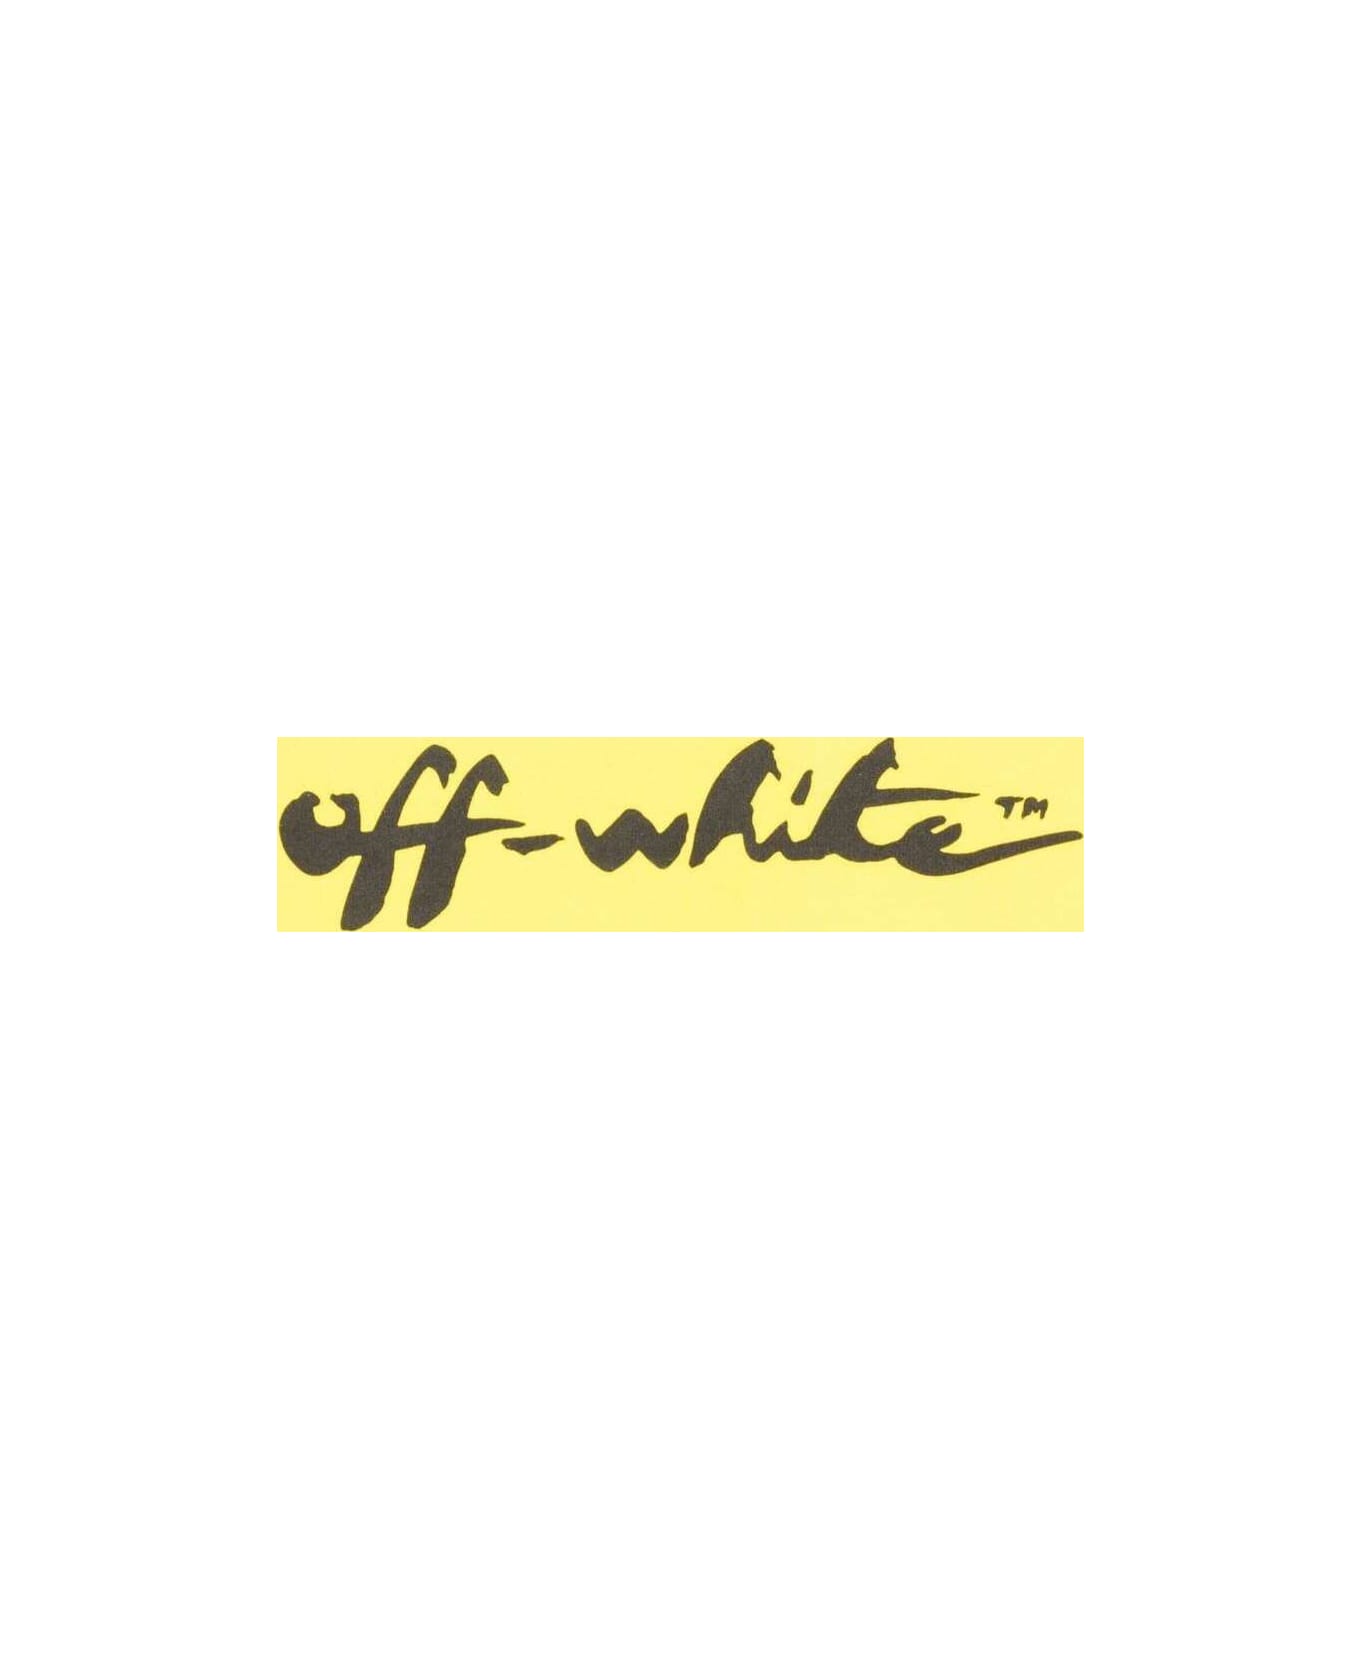 Off-White Yellow Cotton T-shirt With Black Print - Yellow